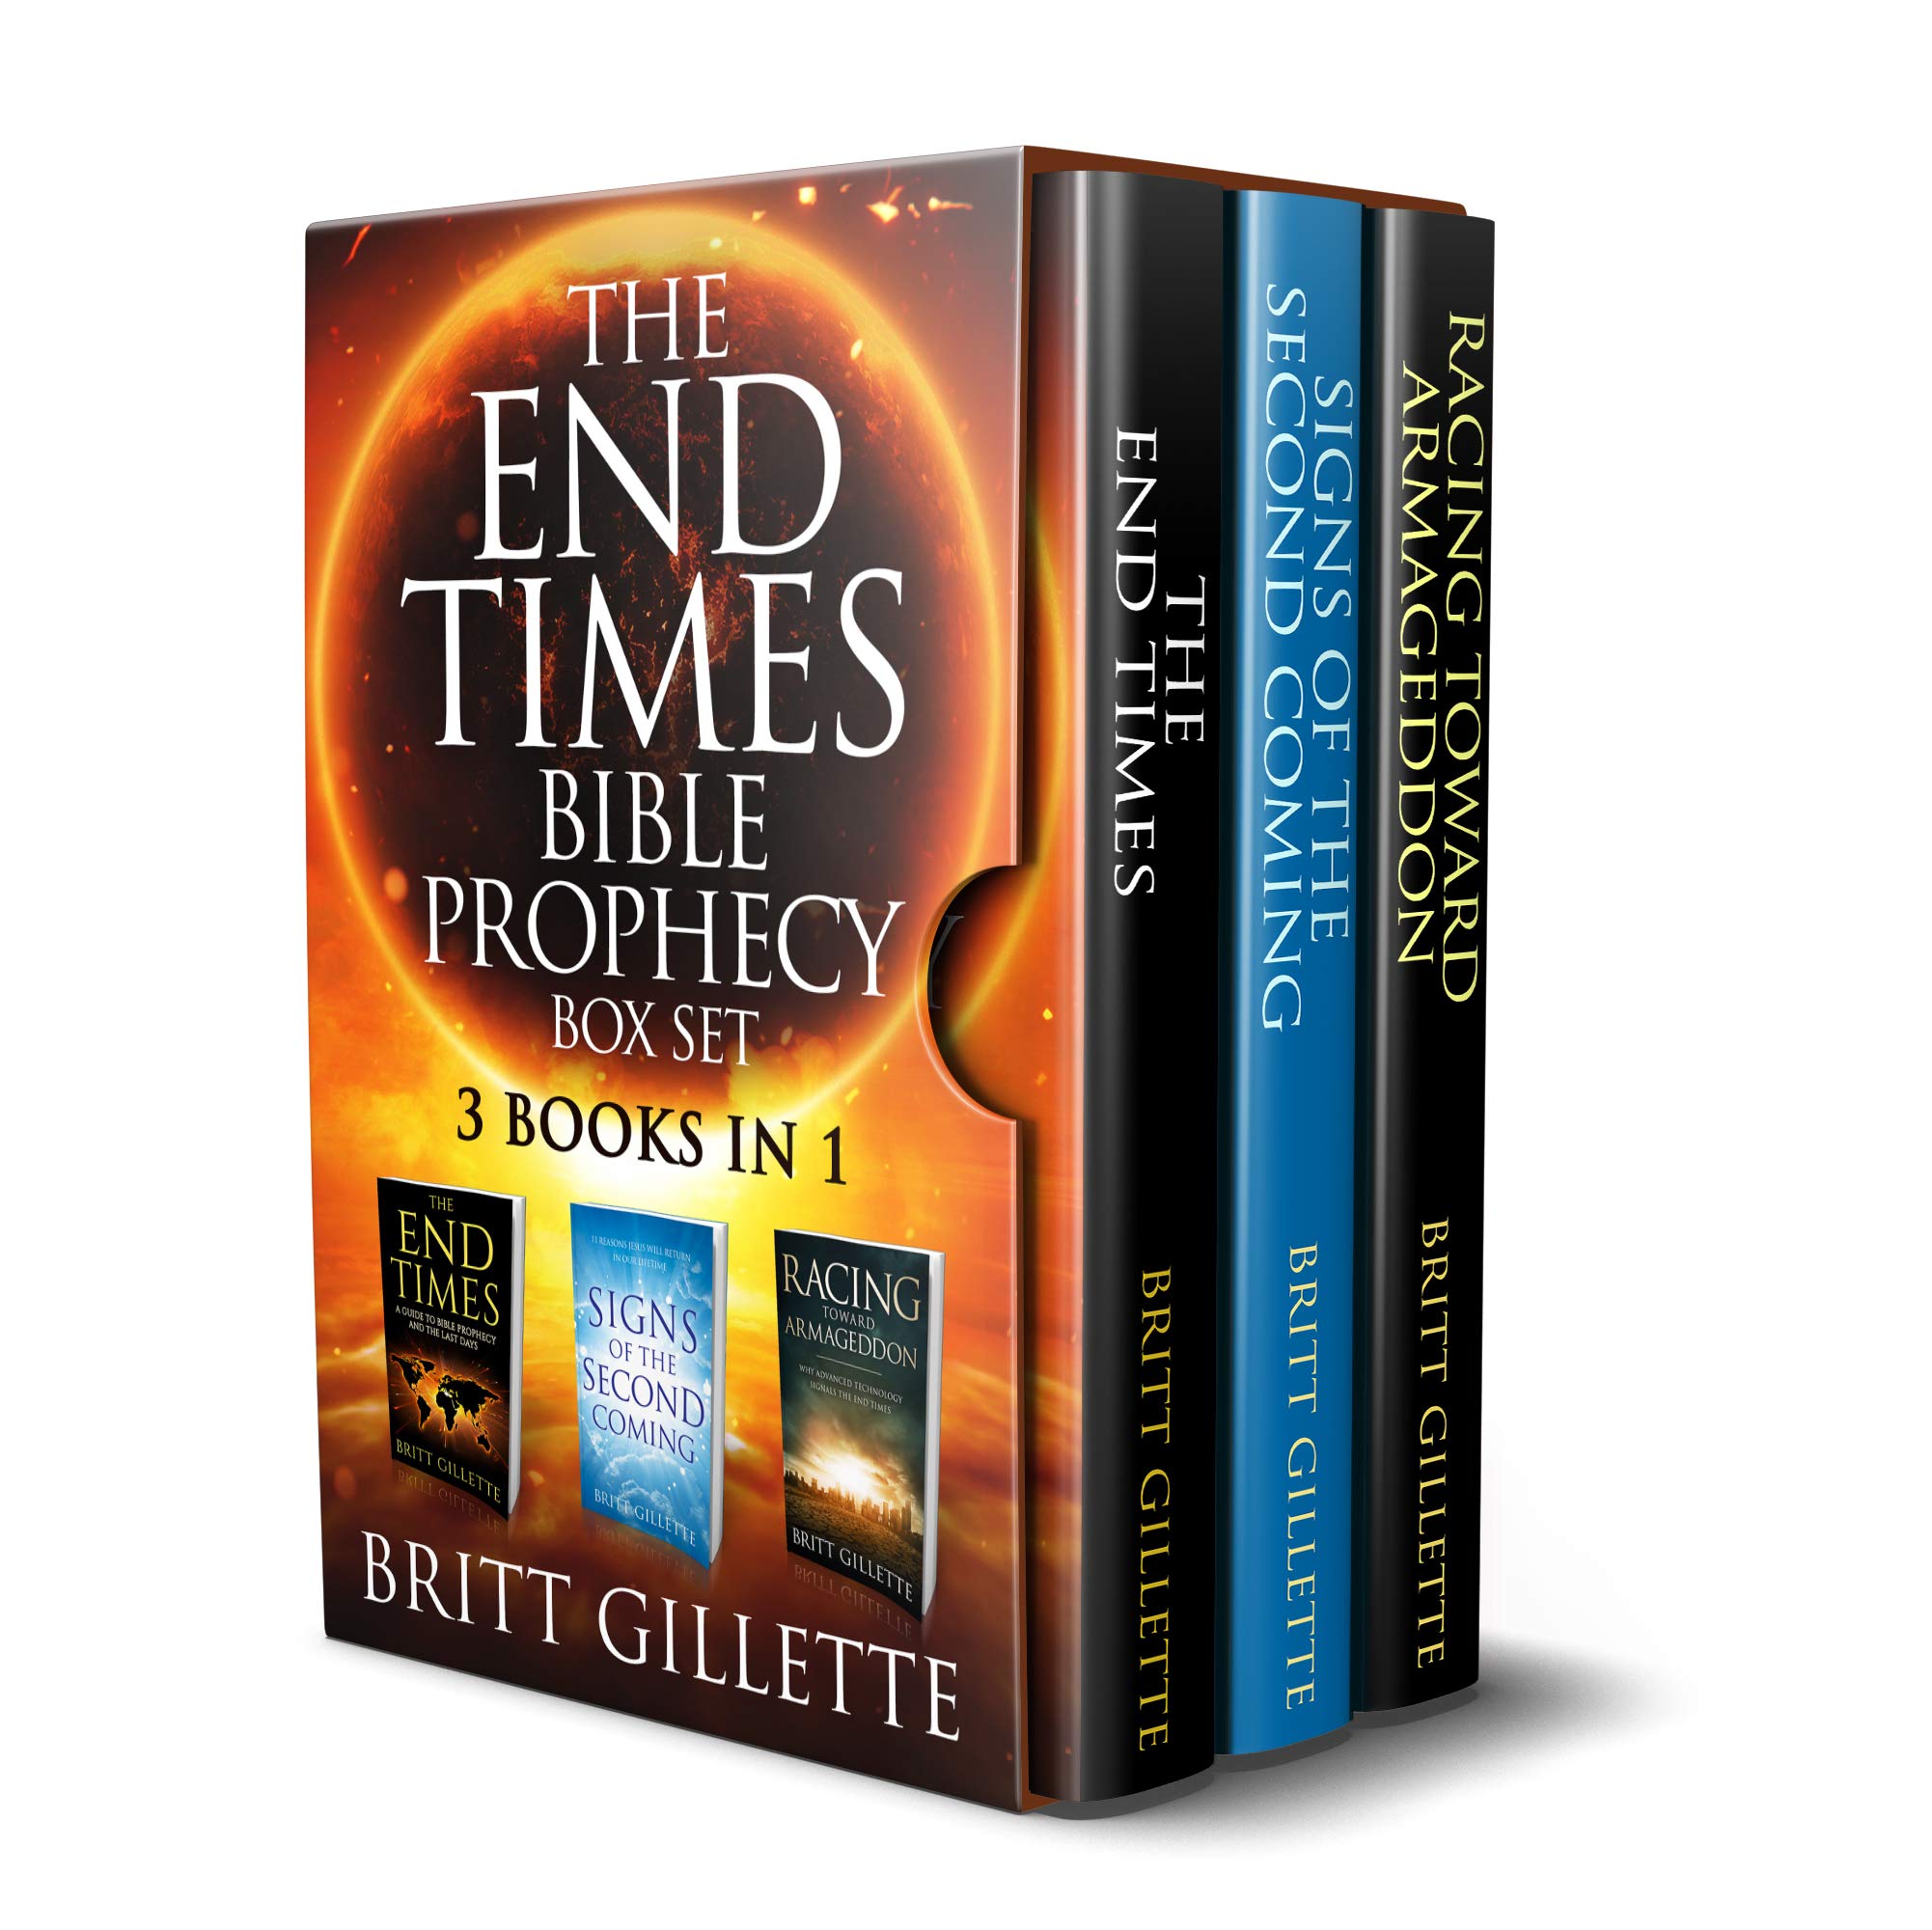 The End Times Bible Prophecy Box Set: 3 Books in 1 - The End Times, Signs of the Second Coming, and Racing Toward Armageddon